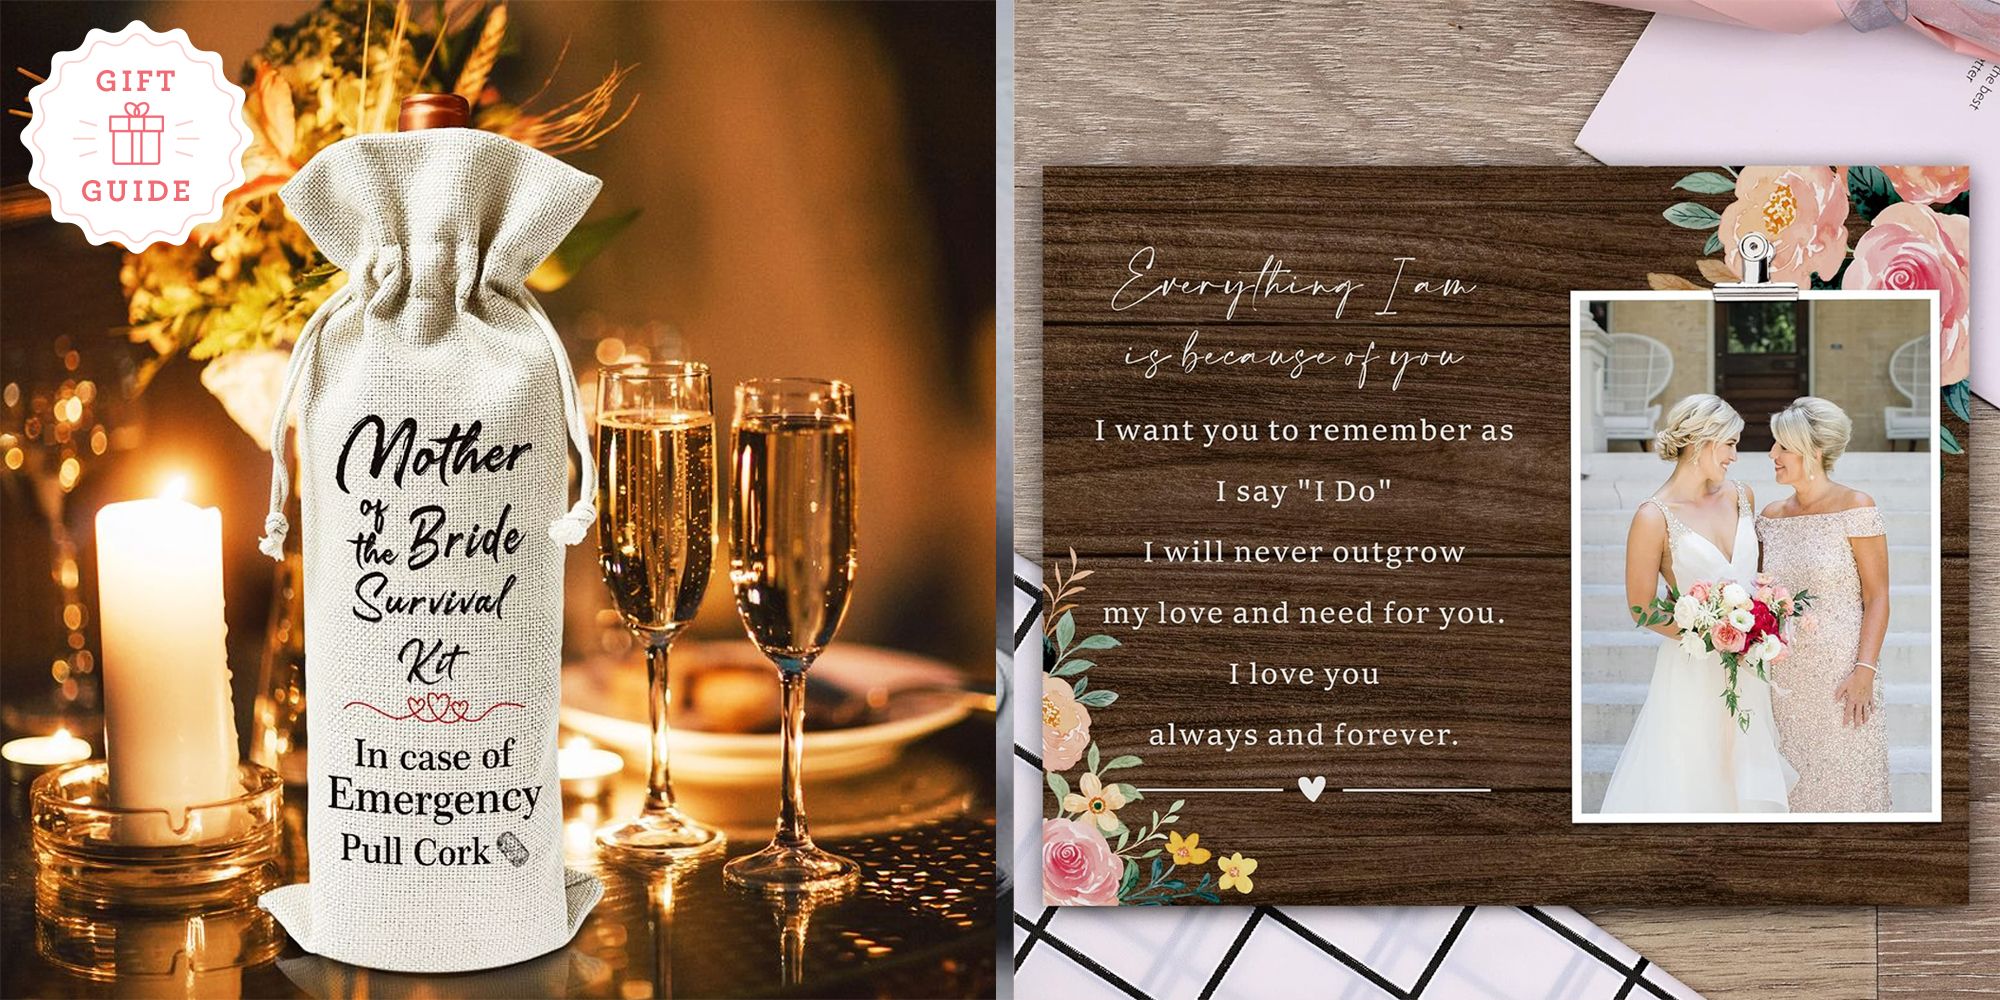 18 luxurious holiday gifts for the bride (all for under $40!)